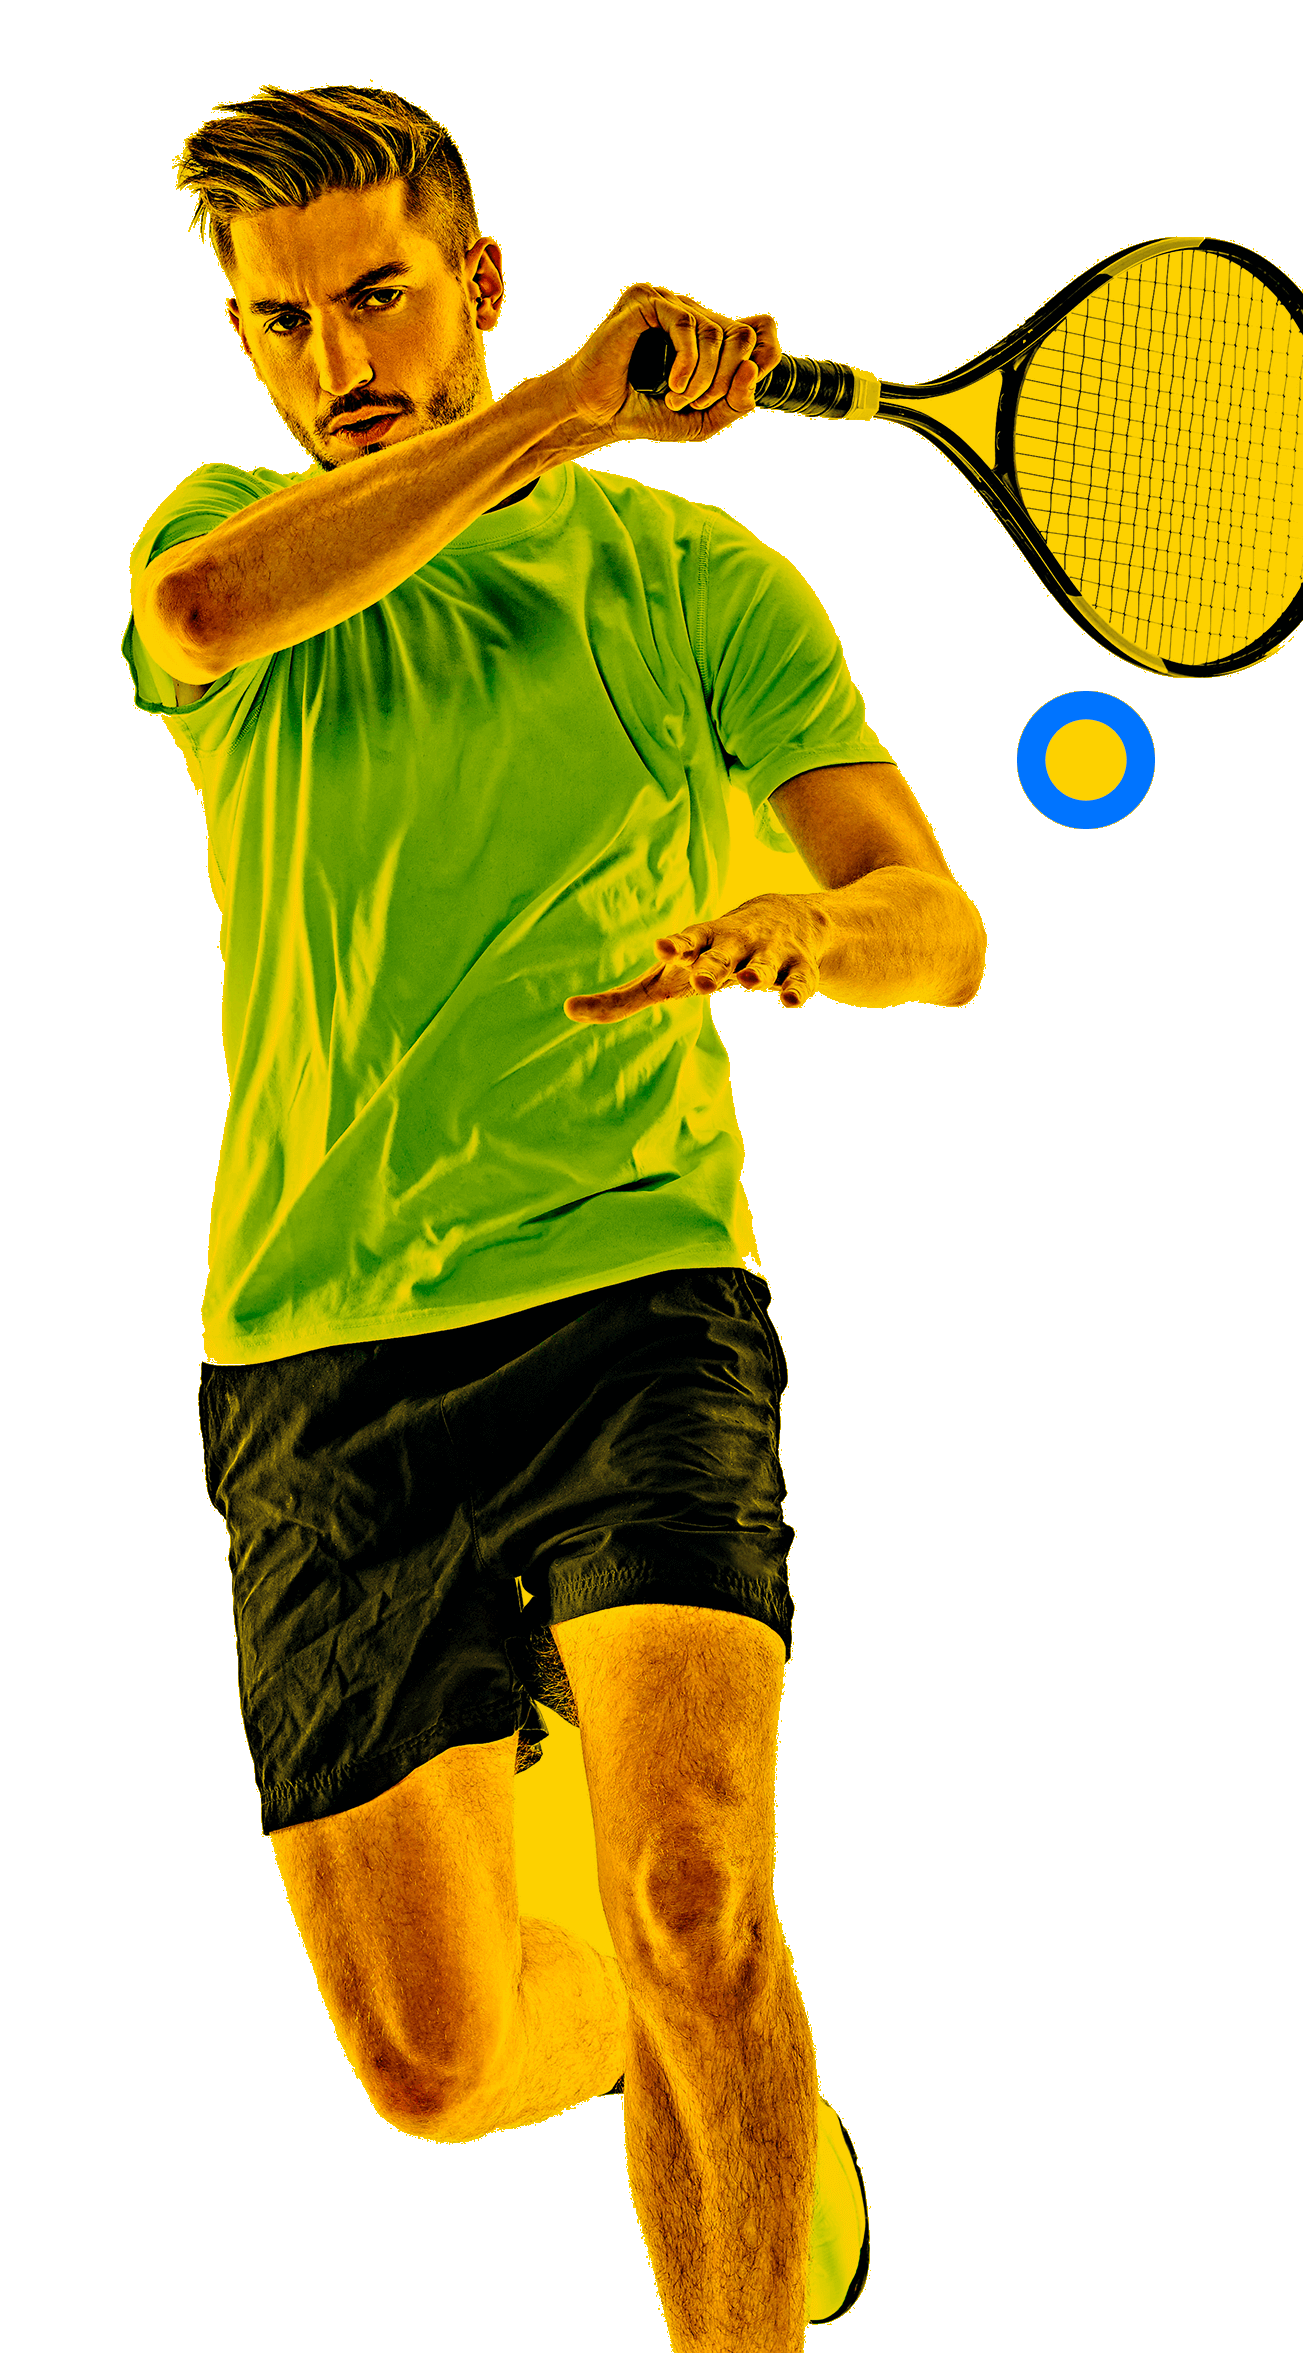 In the picture, a male tennis player hitting the ball.